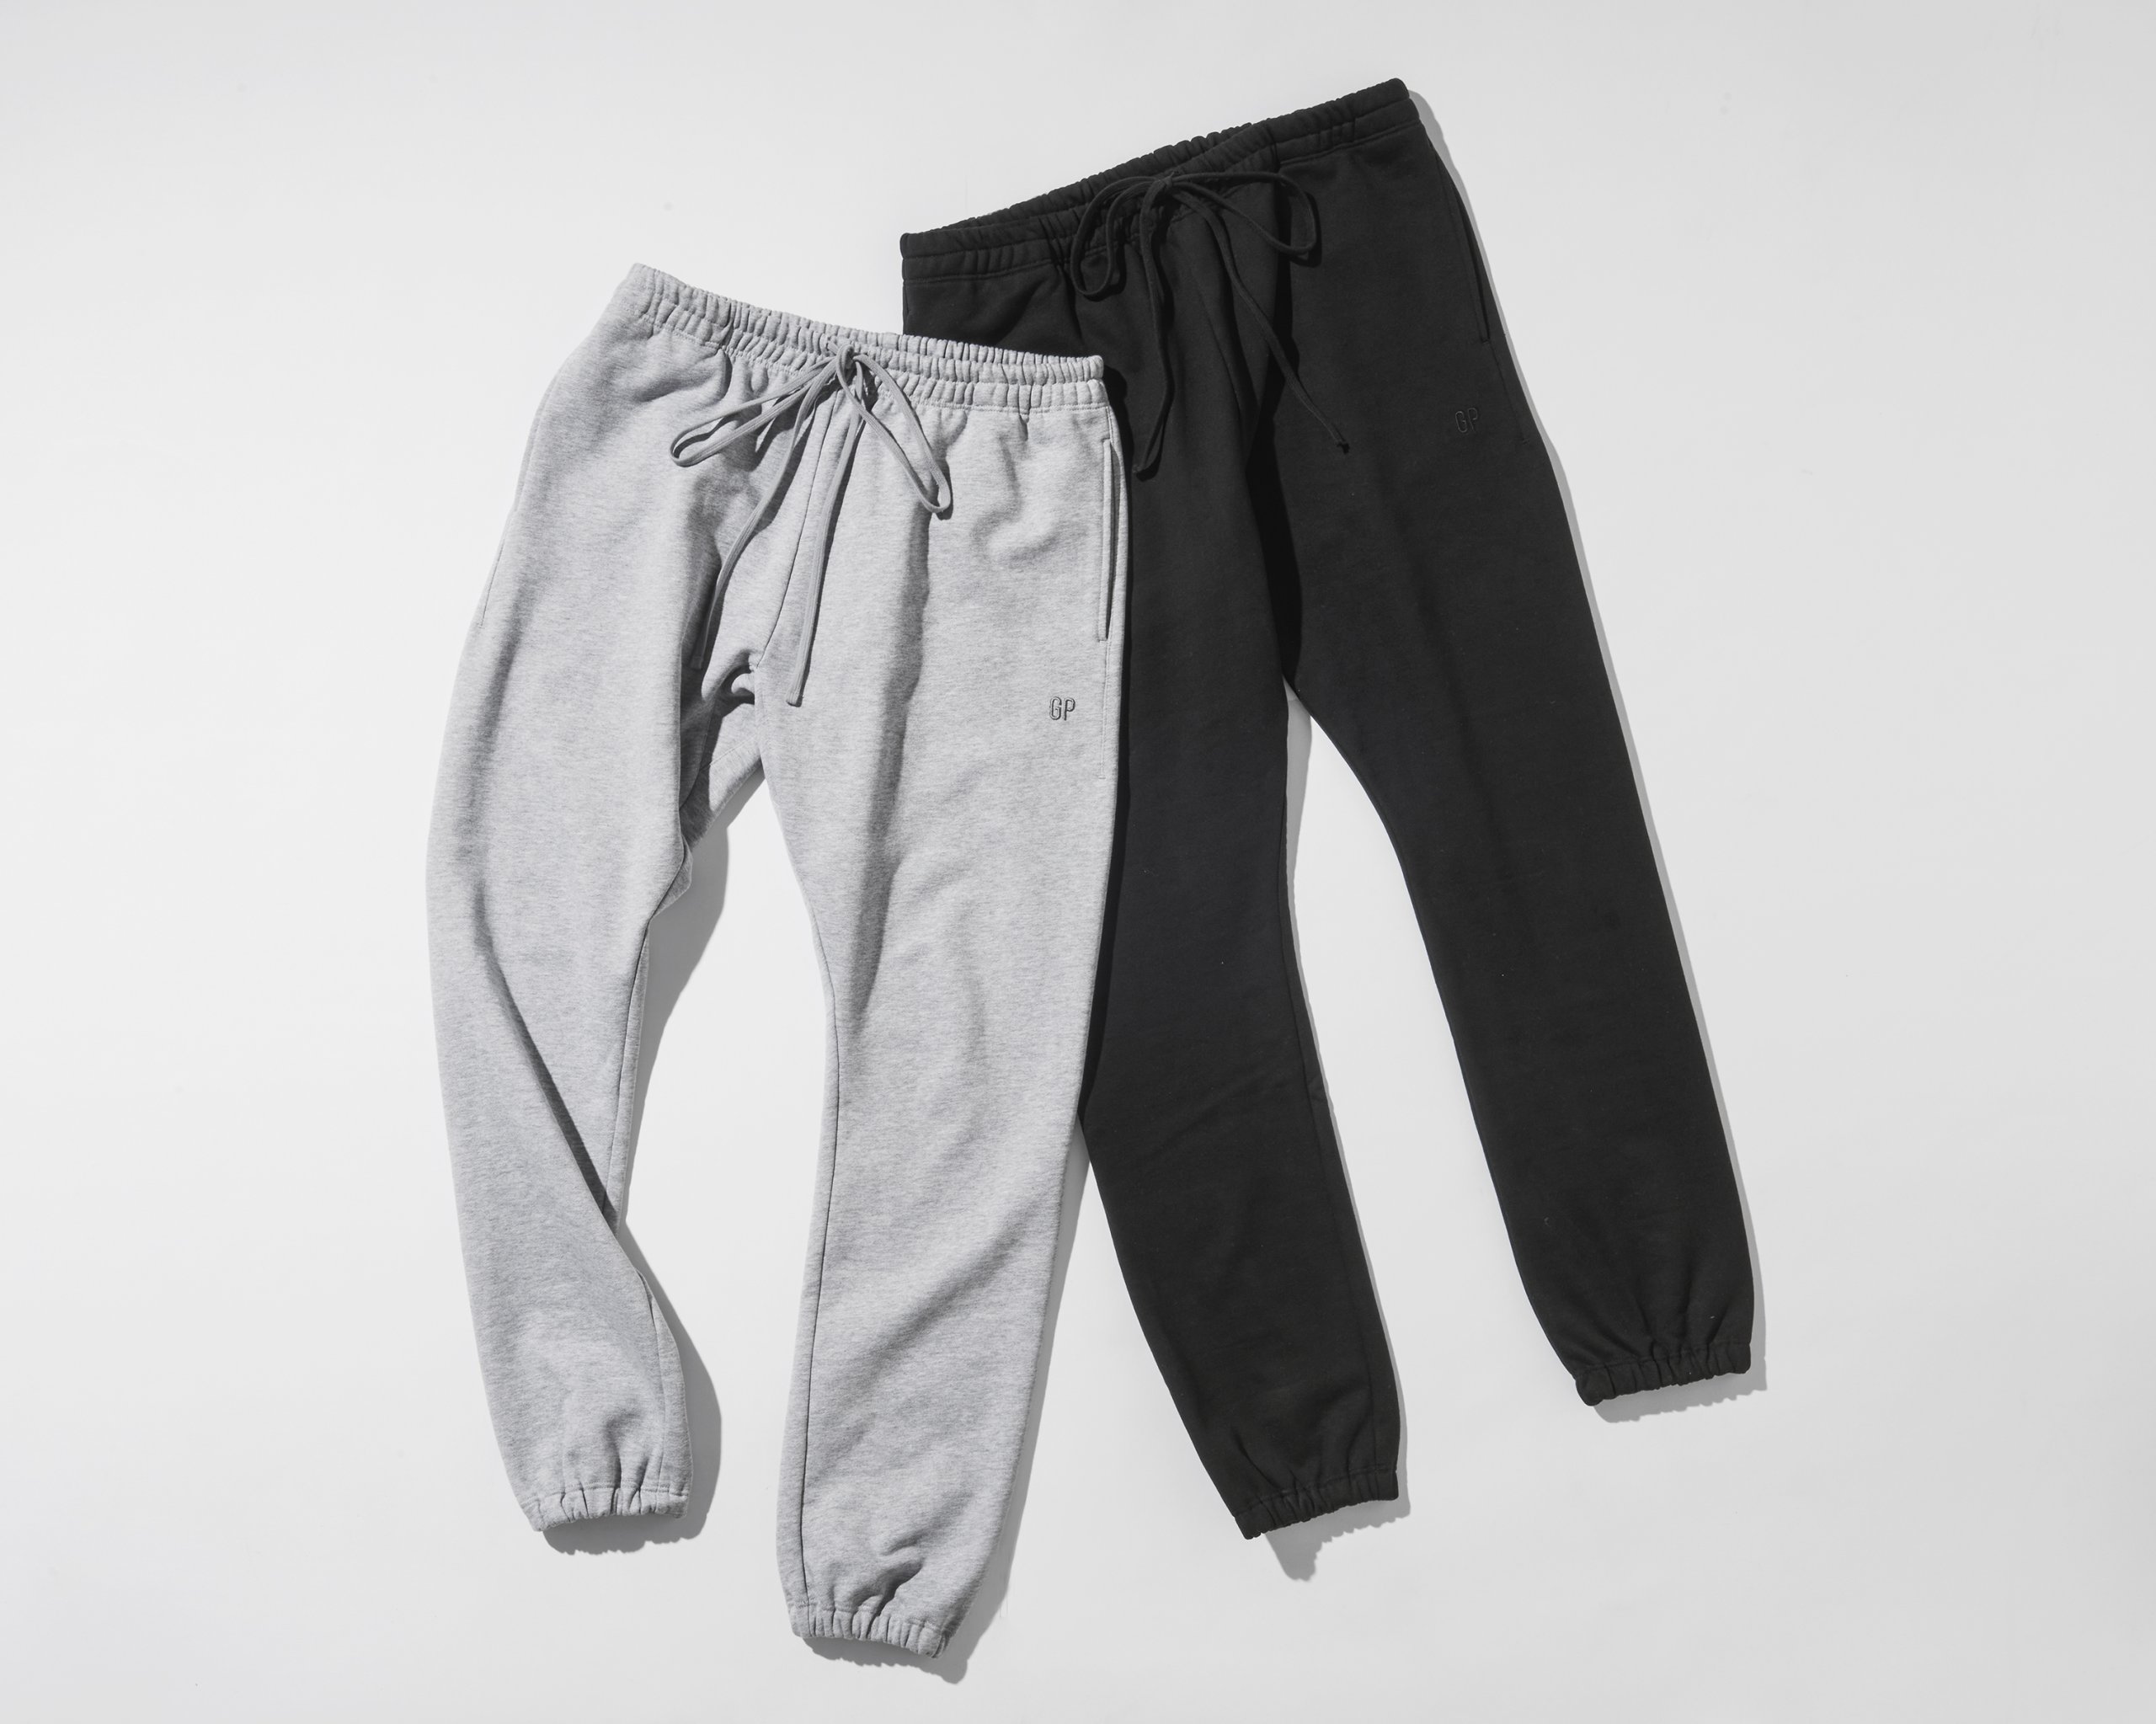 What To Wear With Black Sweatpants Guys? – solowomen